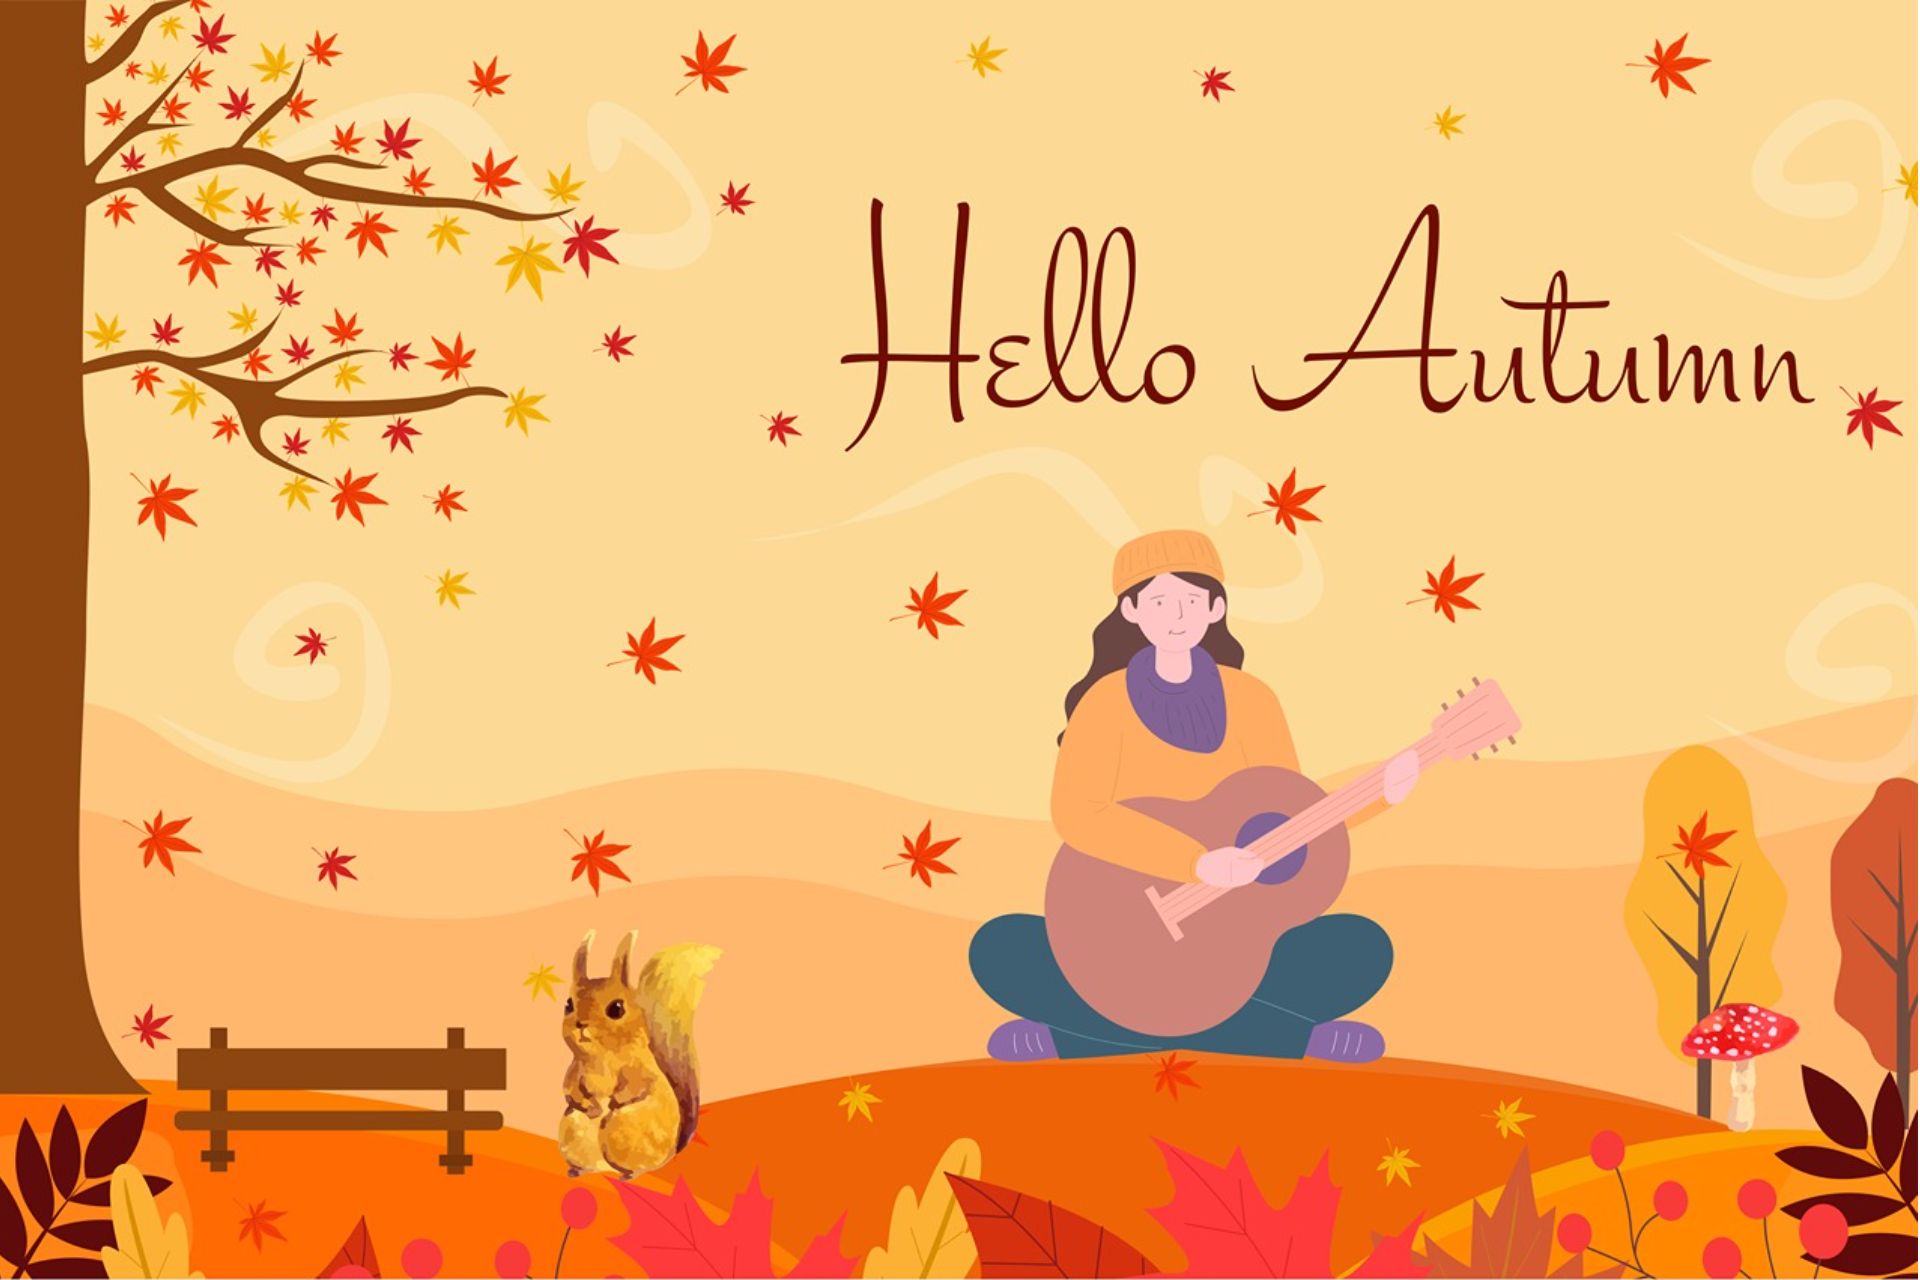 Free Fall Leaves Clipart: Beautiful Collections to Download and 5 Best Use Cases